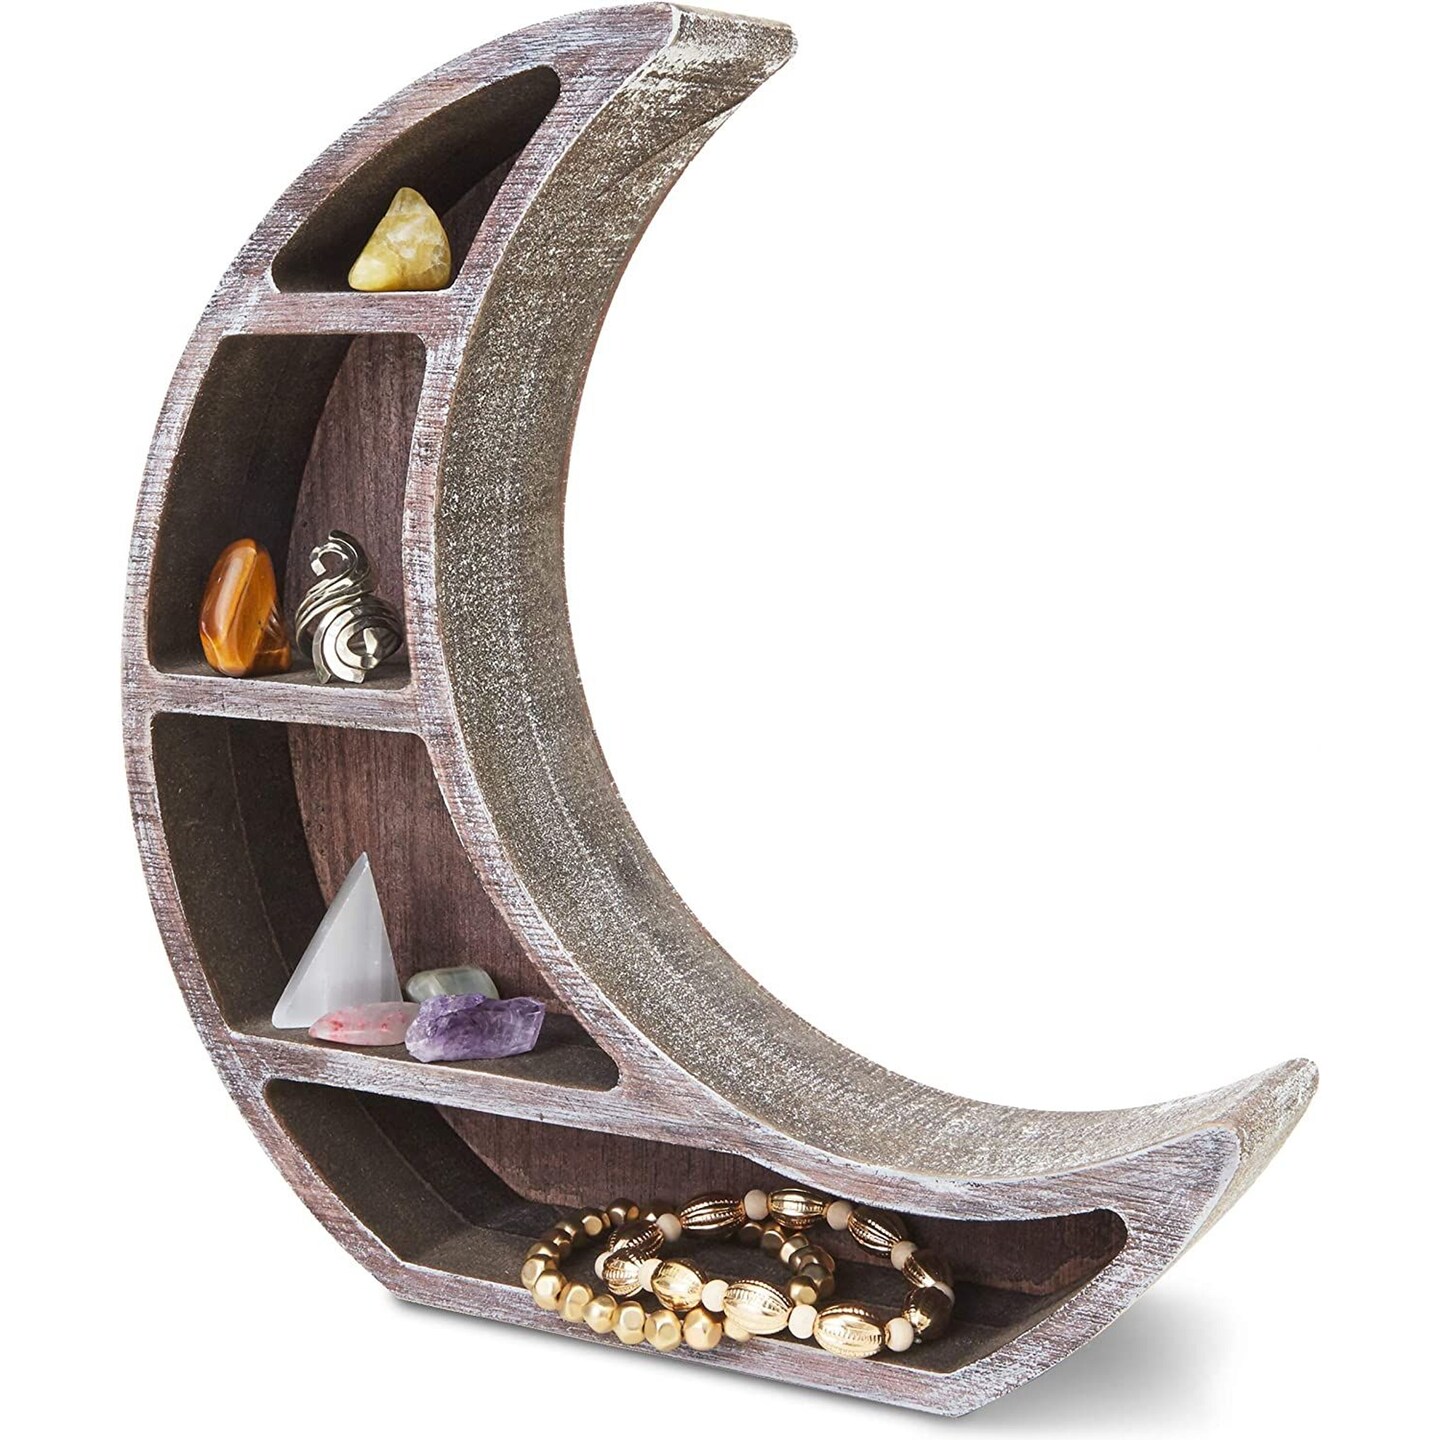 Small Wooden Crescent Moon Shelf for Crystal Display and Essential Oils, Rustic Home Decor for Nursery (10 x 10.2 x 2 In)